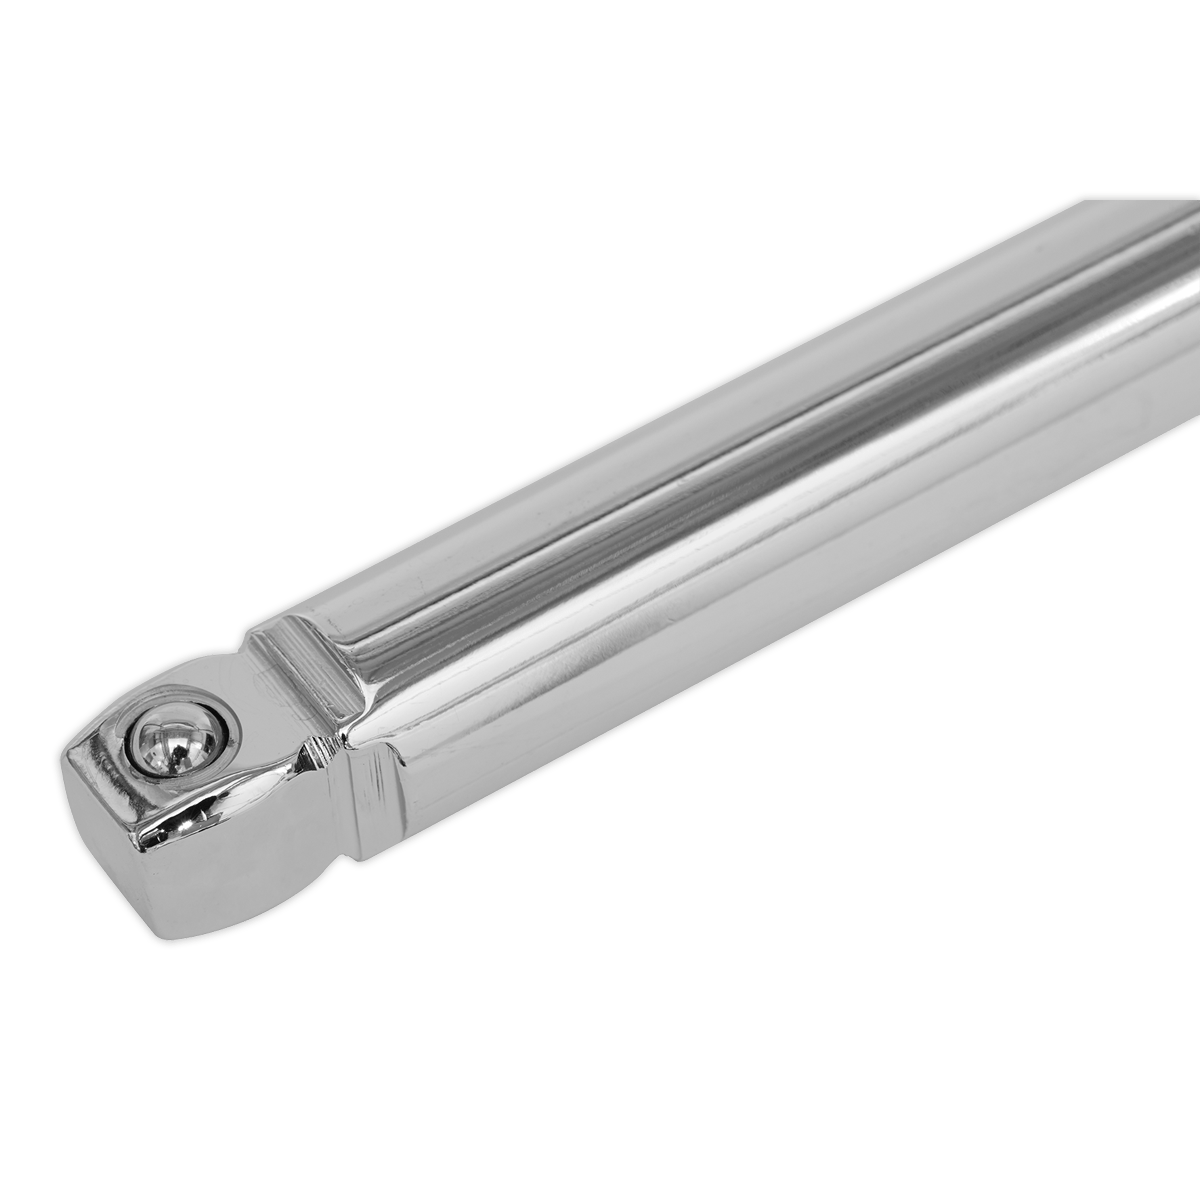 Wobble/Rigid Extension Bar Set 3pc 1/2"Sq Drive | Forged Chrome Vanadium steel shafts, heat treated and chrome plated with mirror finish. | toolforce.ie